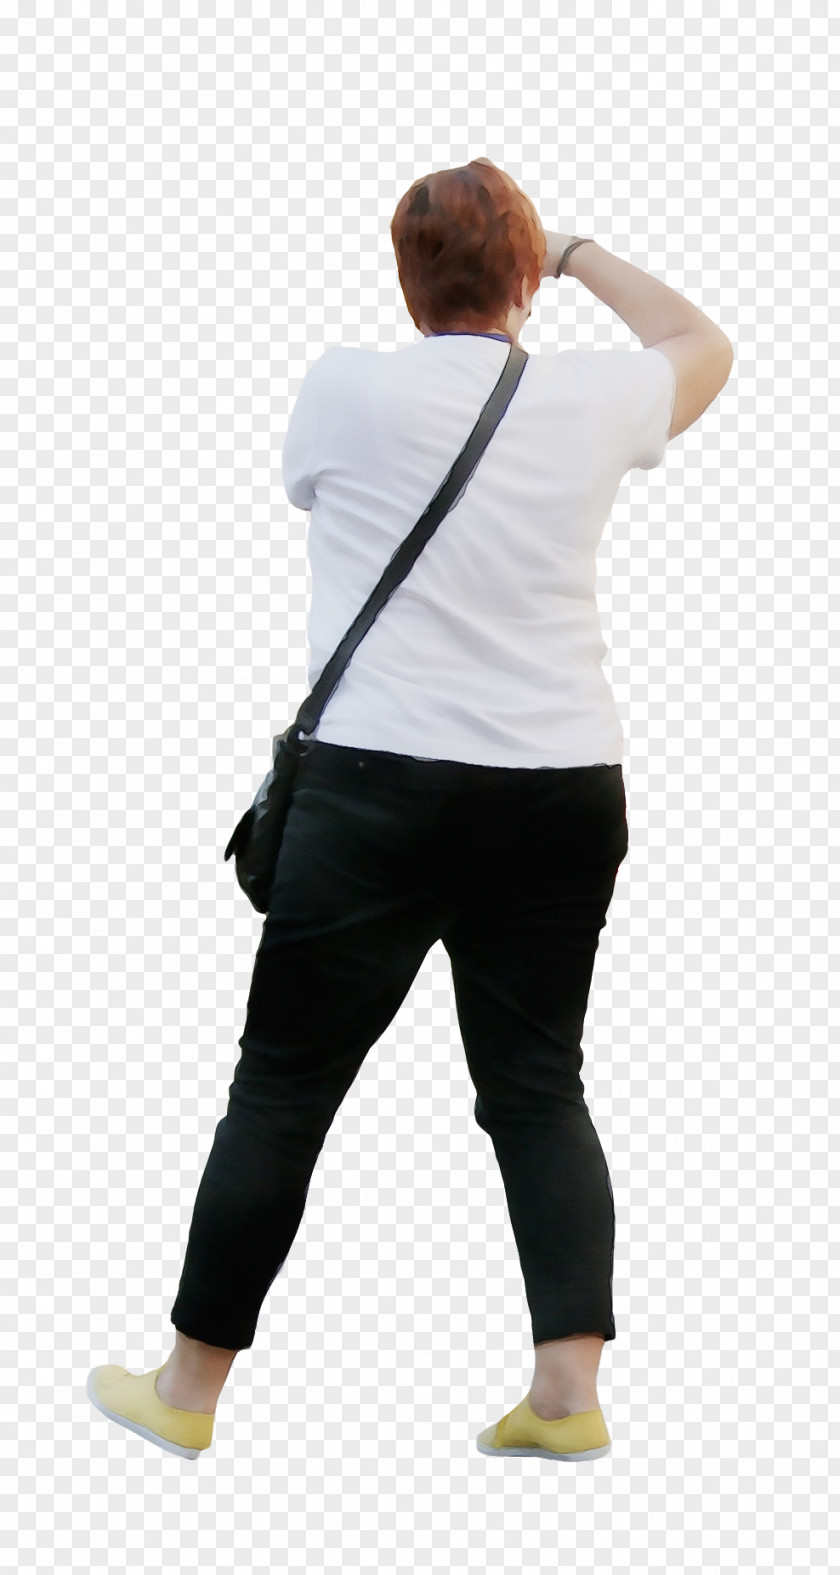 Knee Pocket Camera Silhouette PNG